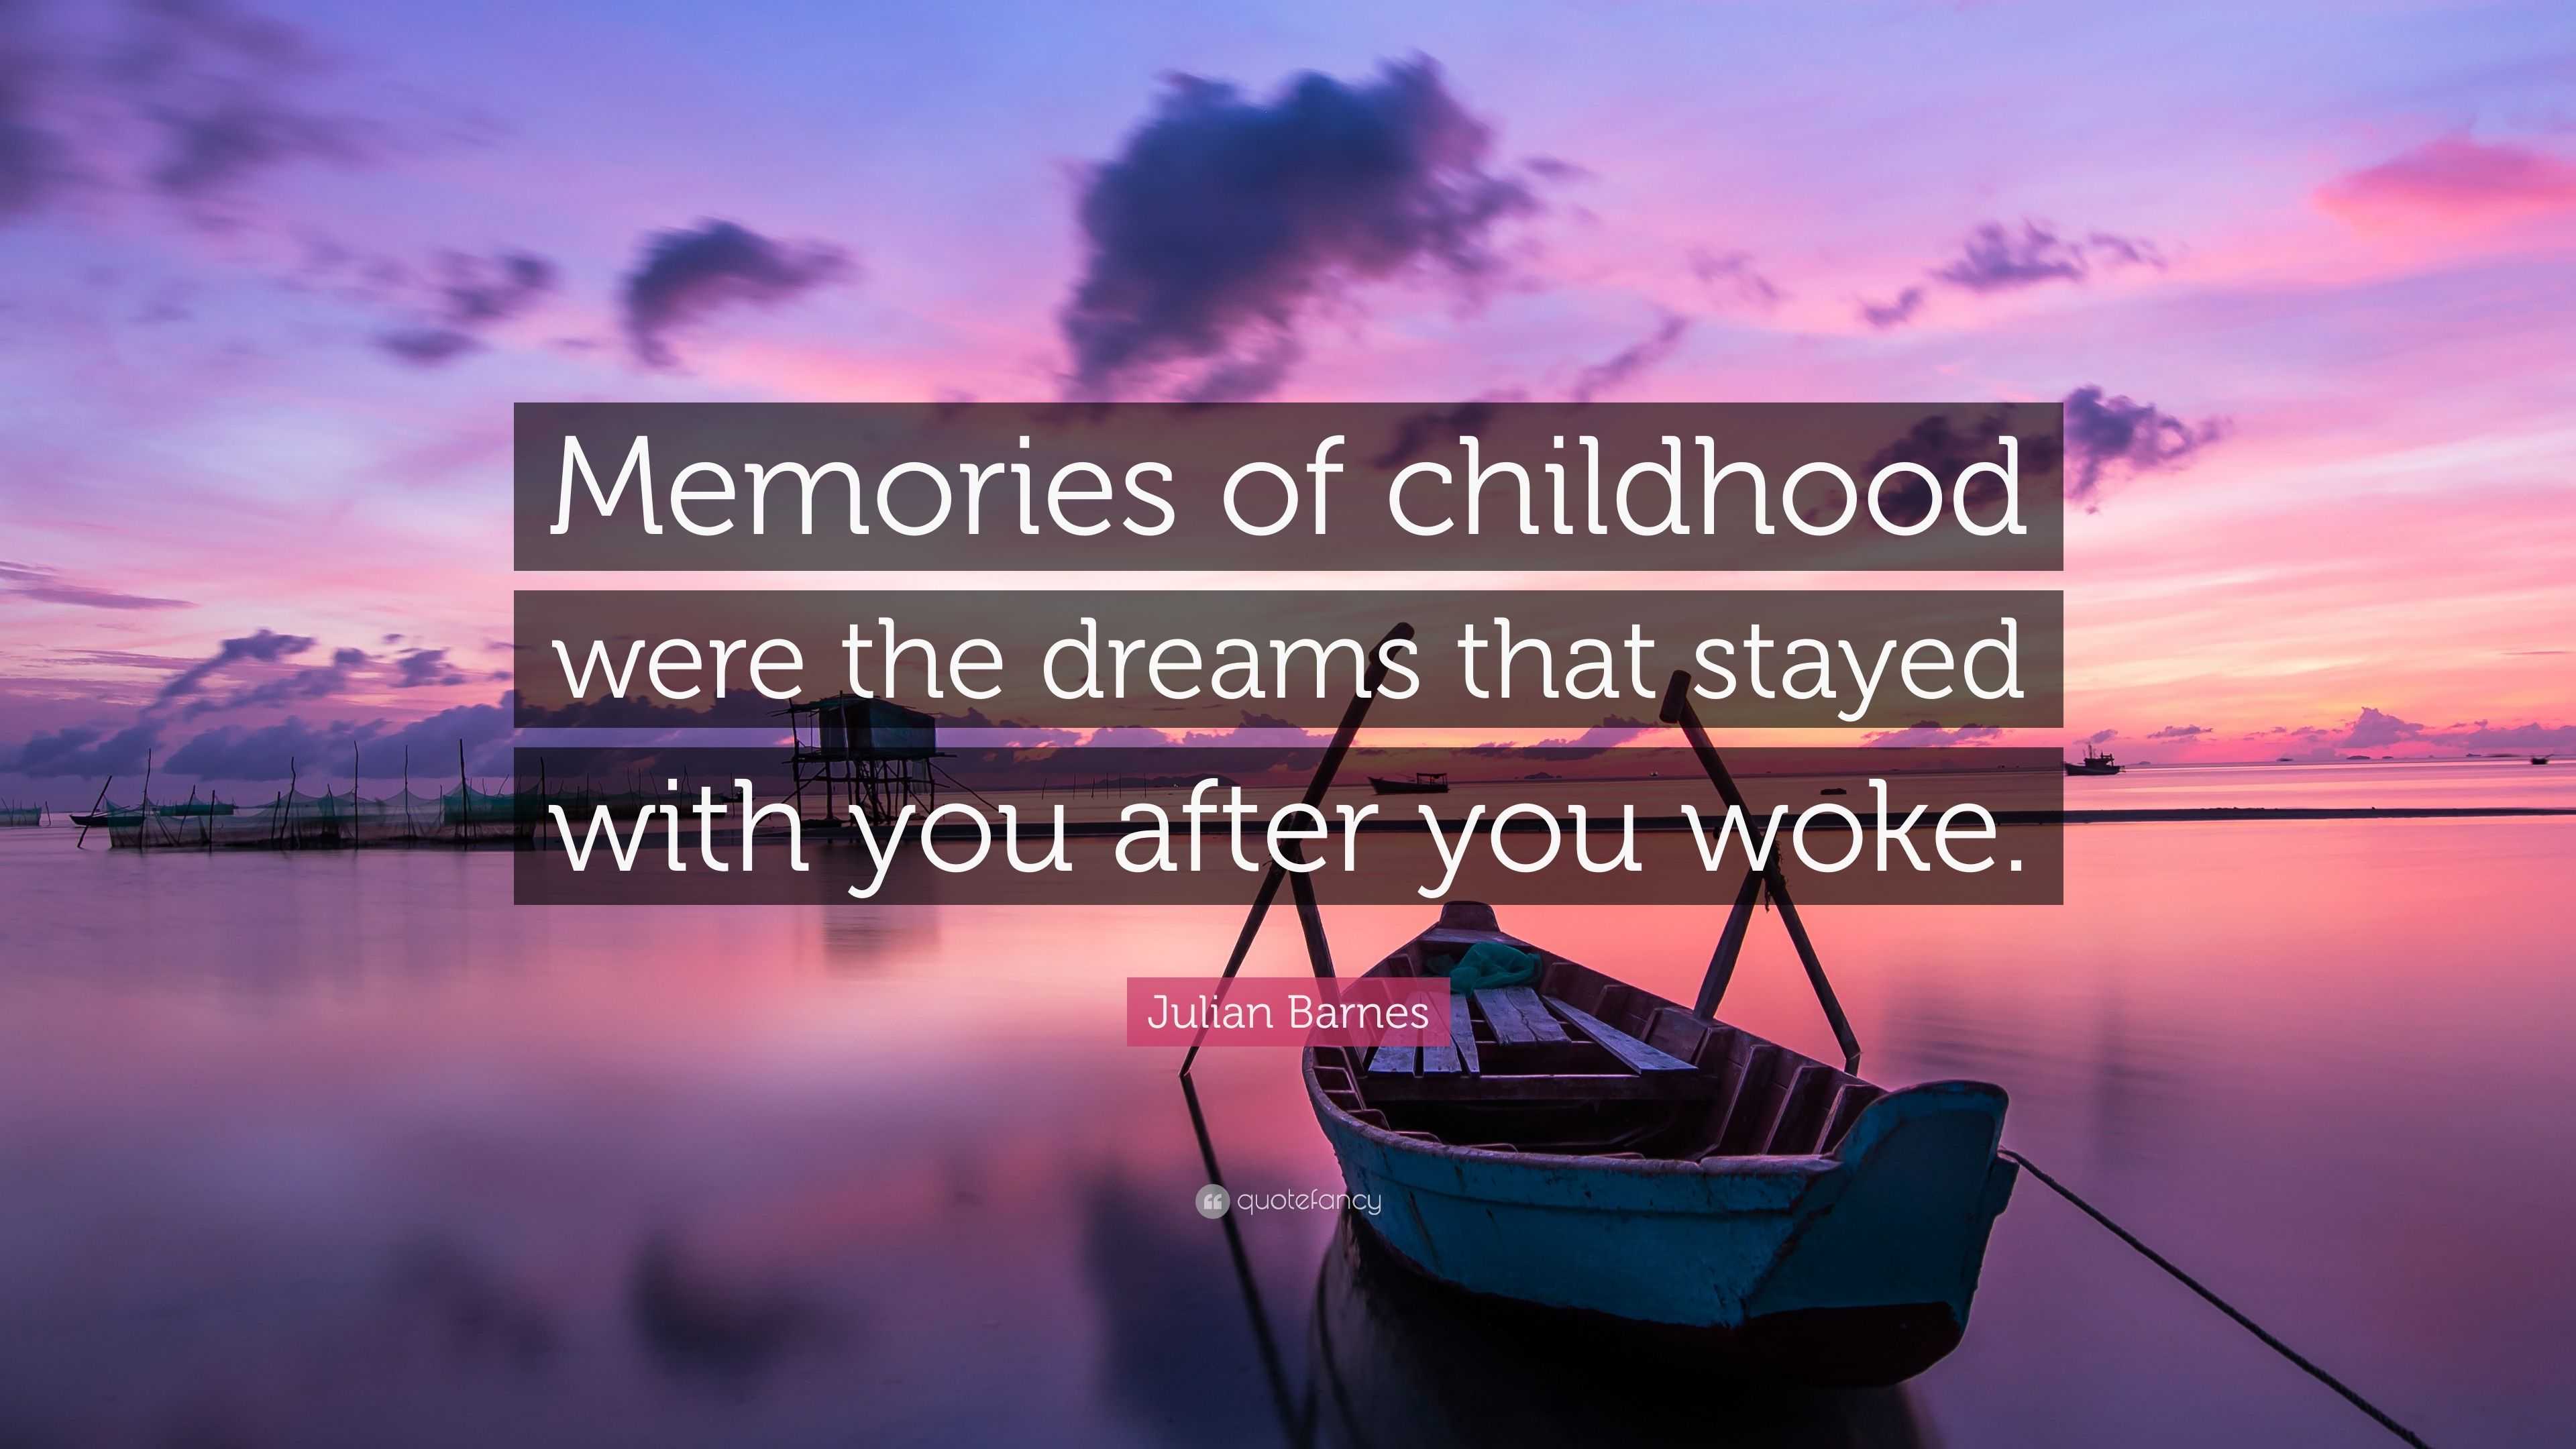 Julian Barnes Quote: “Memories of childhood were the dreams that stayed